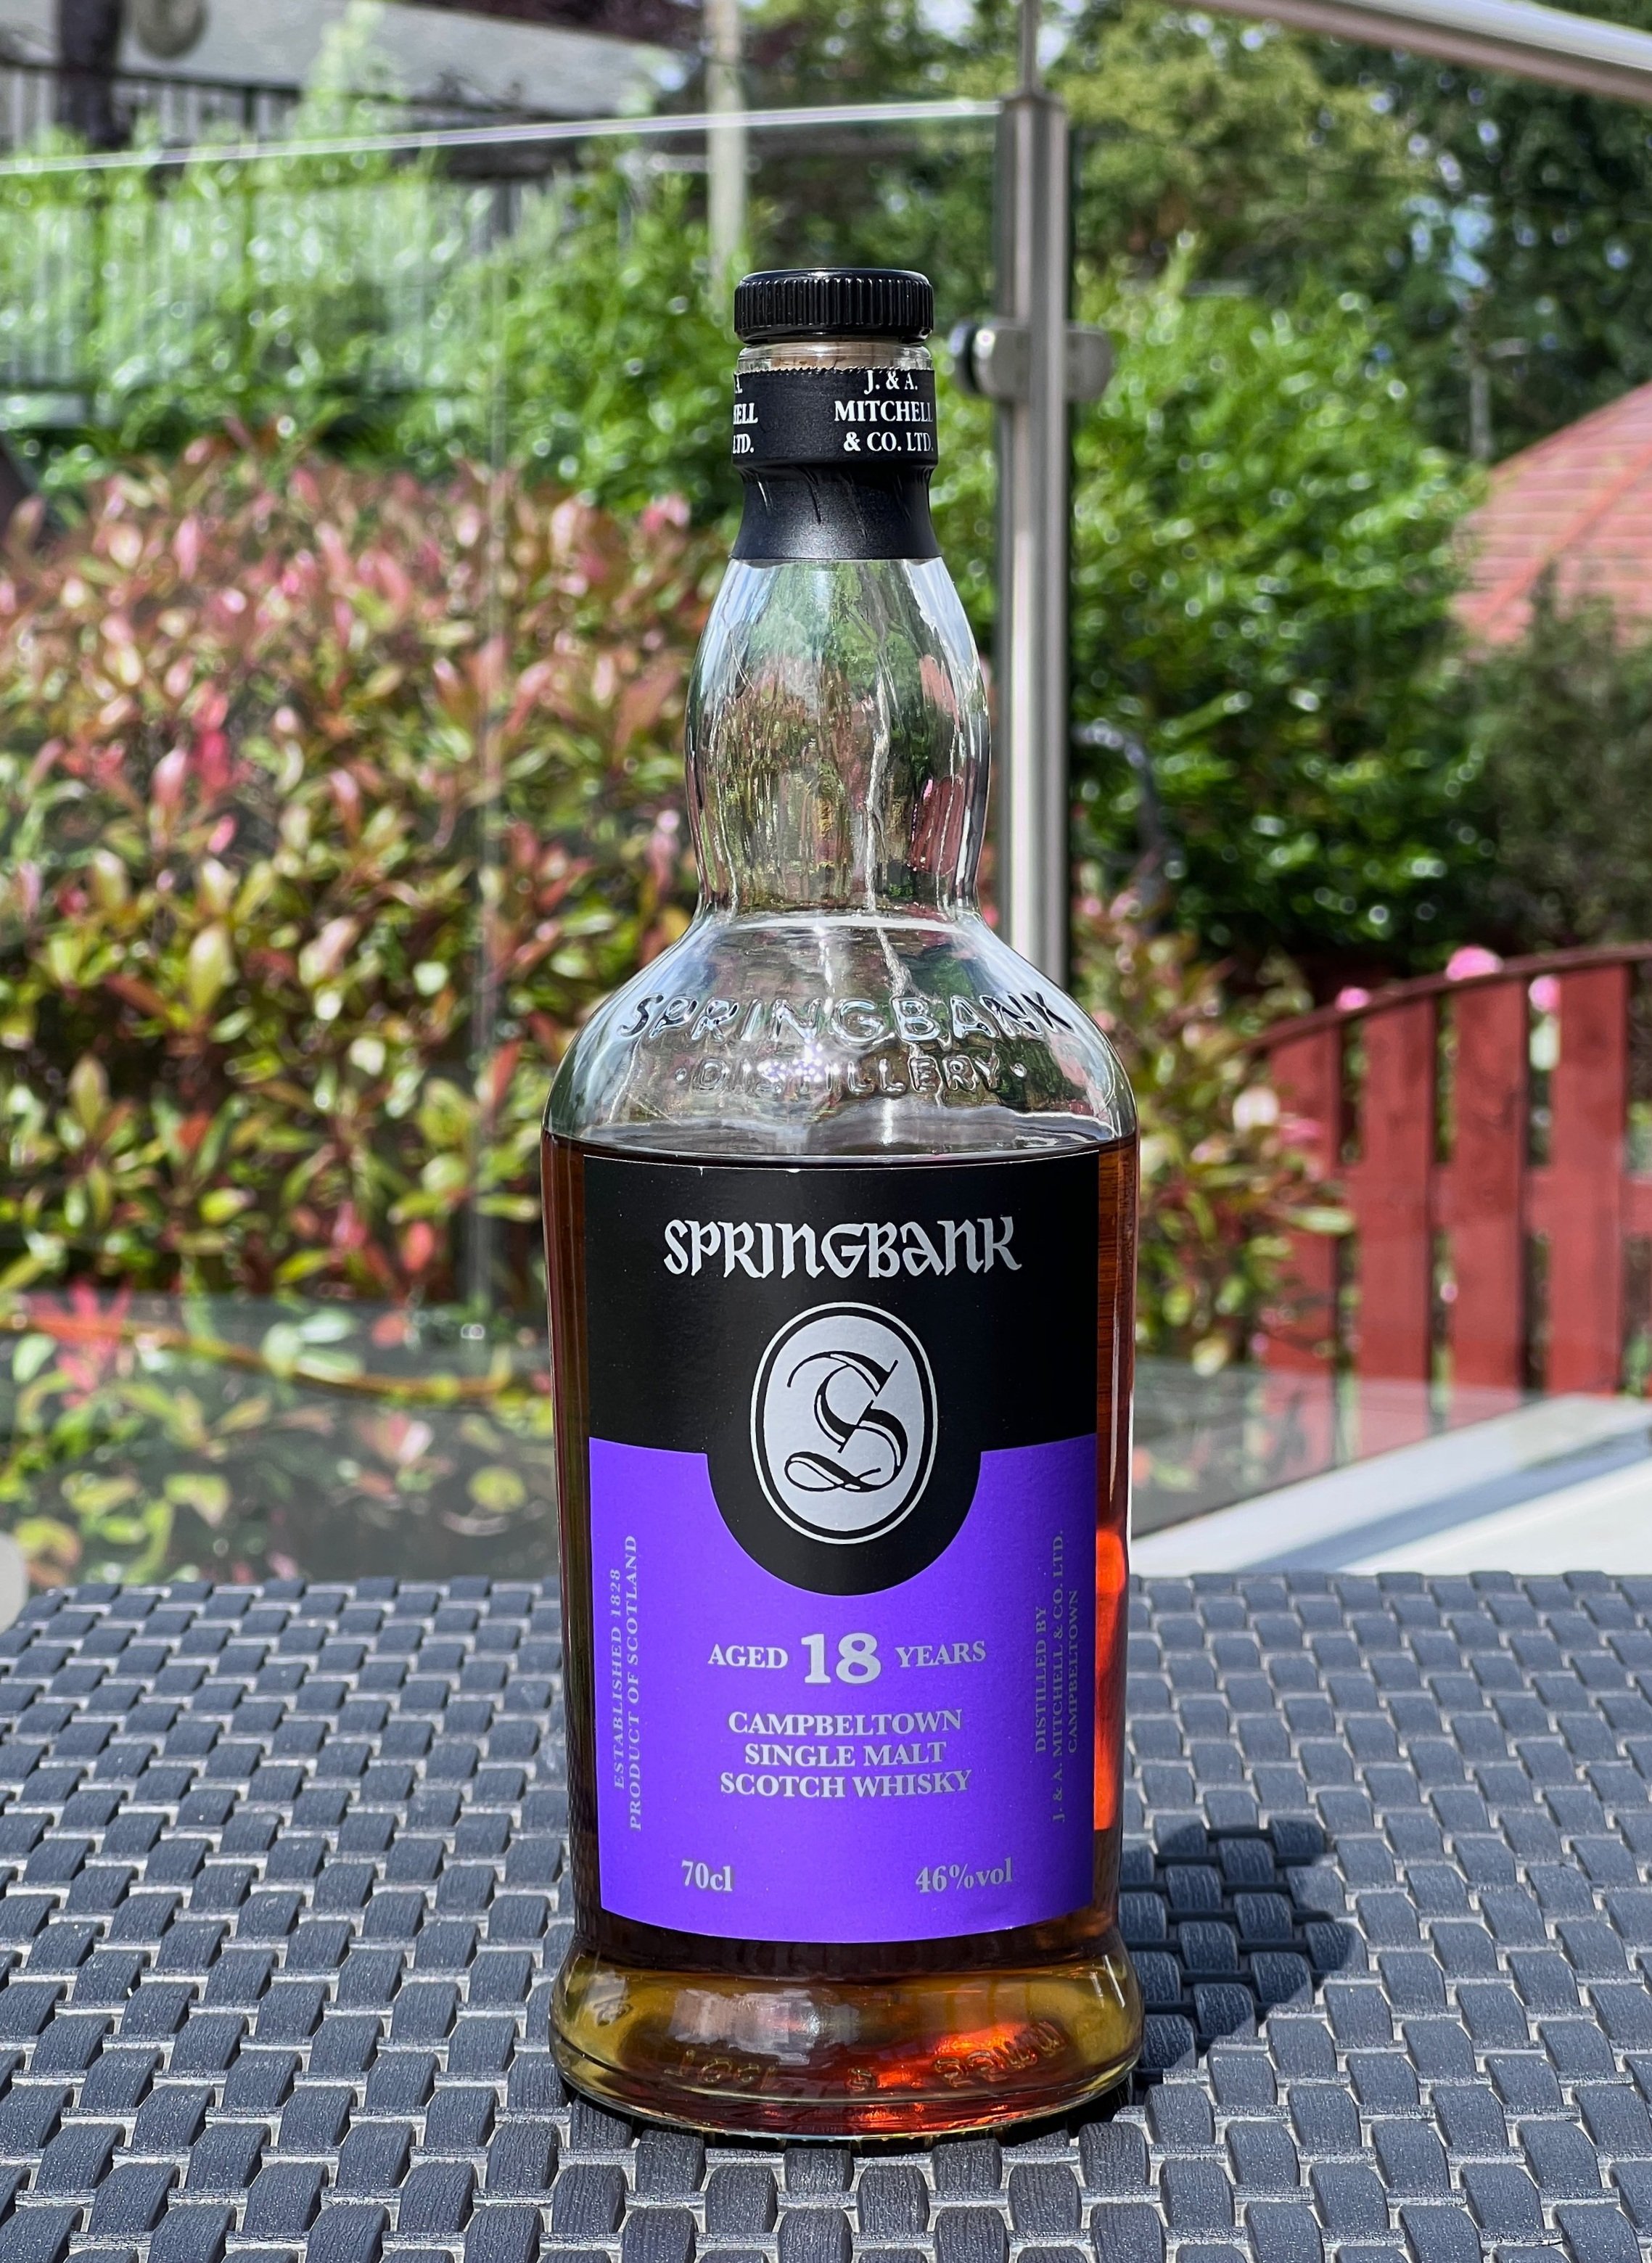 SPRINGBANK 10 YEARS whisky - rond point